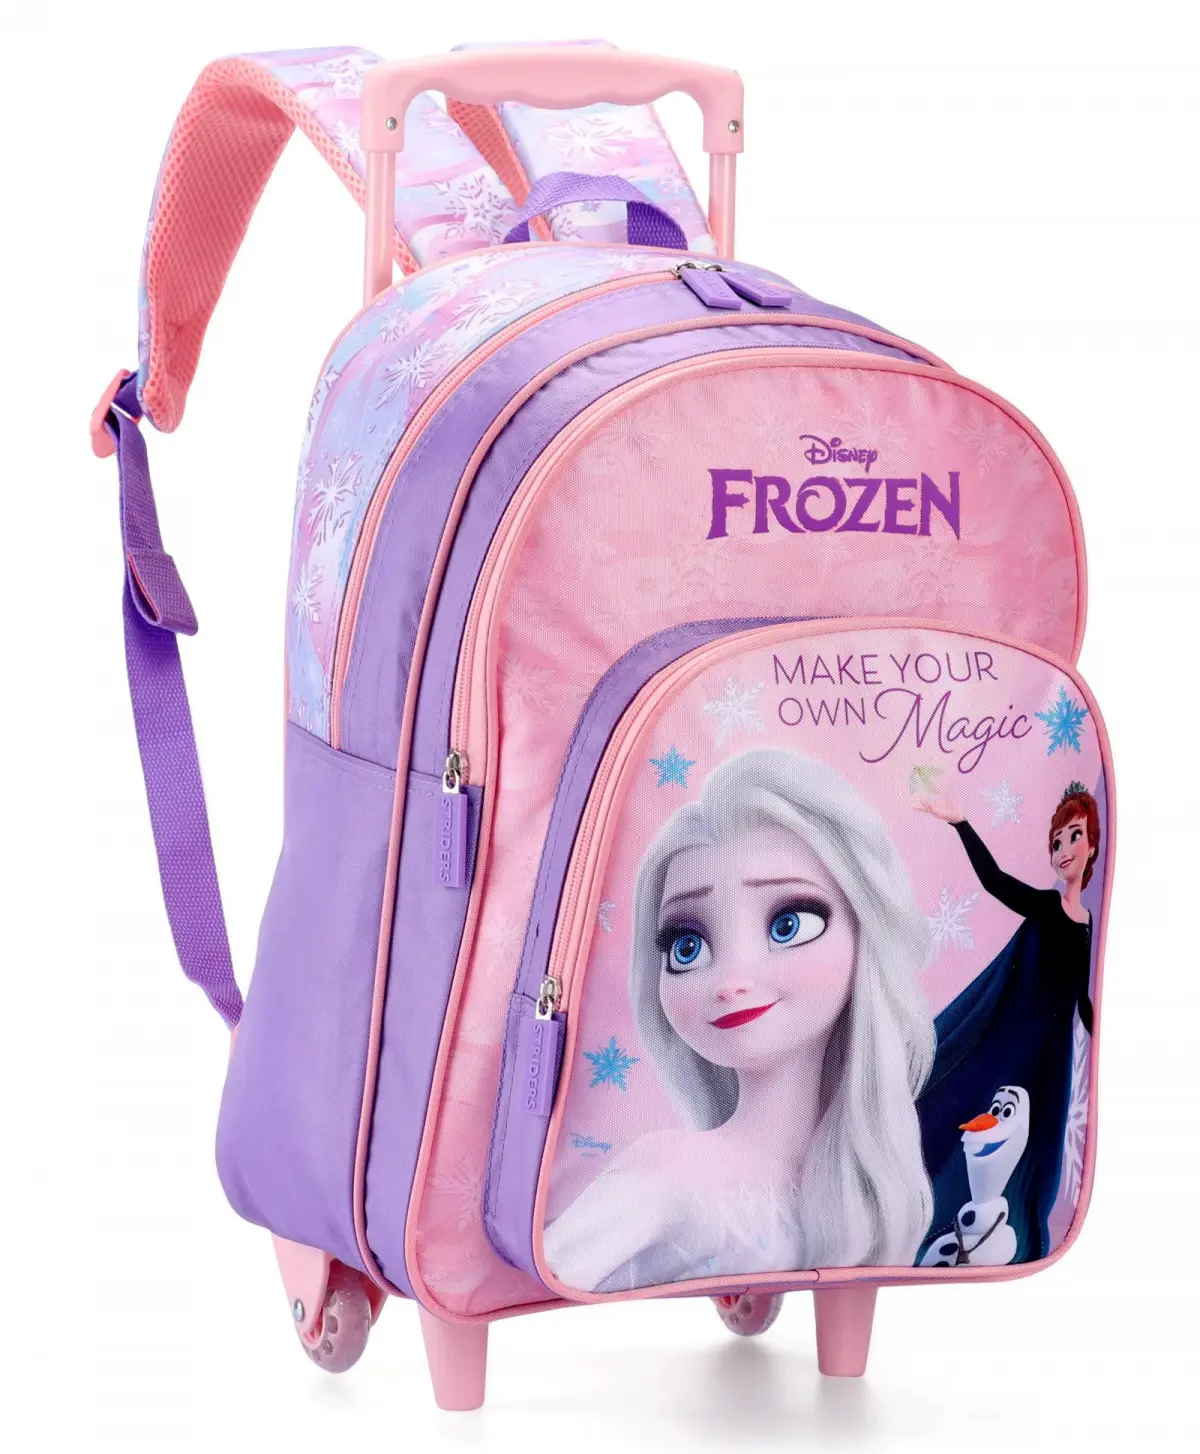 Striders 18 inches Frozen-Inspired School Trolley Bag for Winter Wonderland Adventures Multicolor For Kids Ages 8Y+